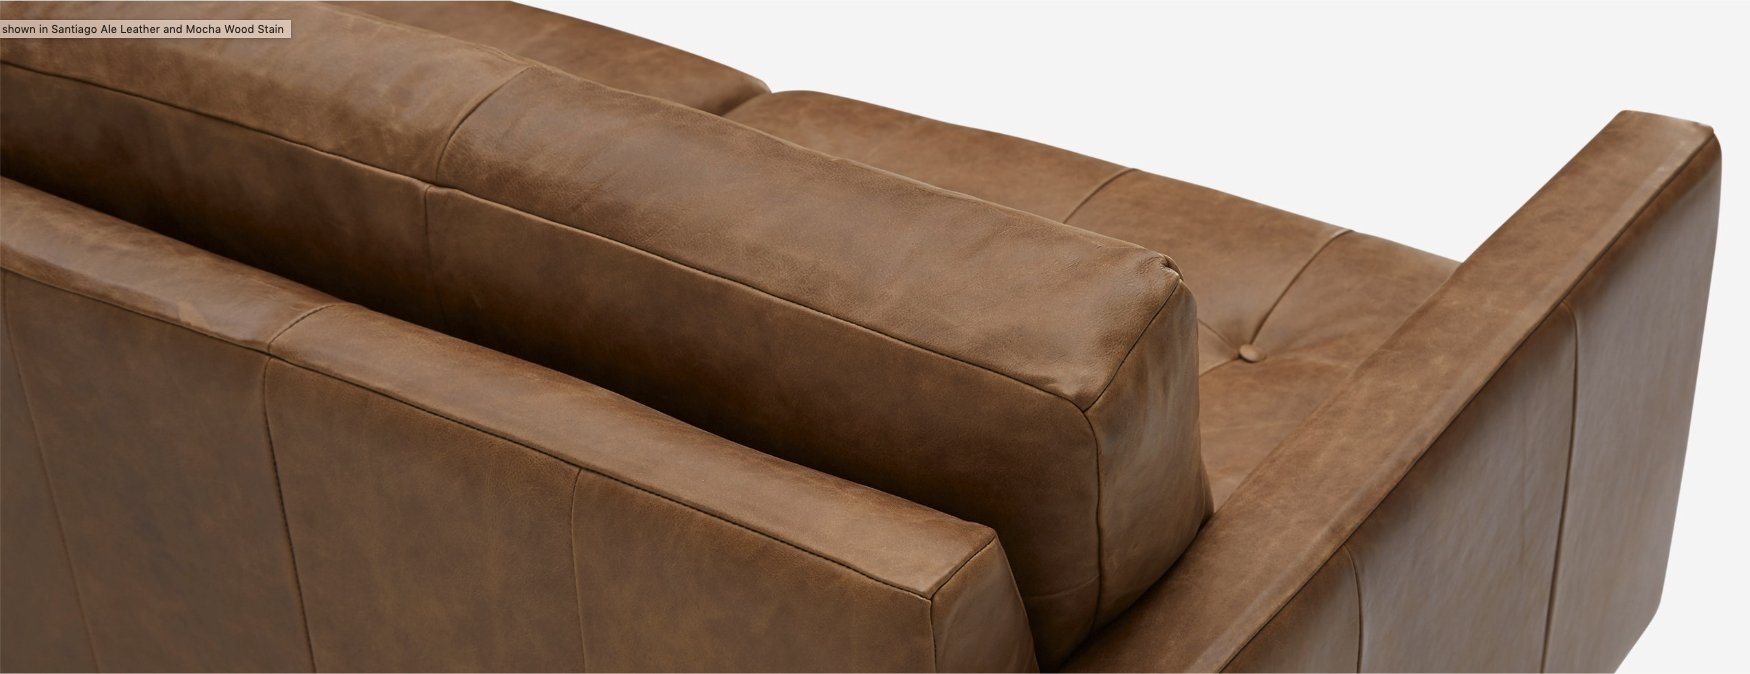 Eliot Leather Sectional with Bumper - Right Arm Orientation - in Santiago Ale with Mocha Wood Stain - Image 8